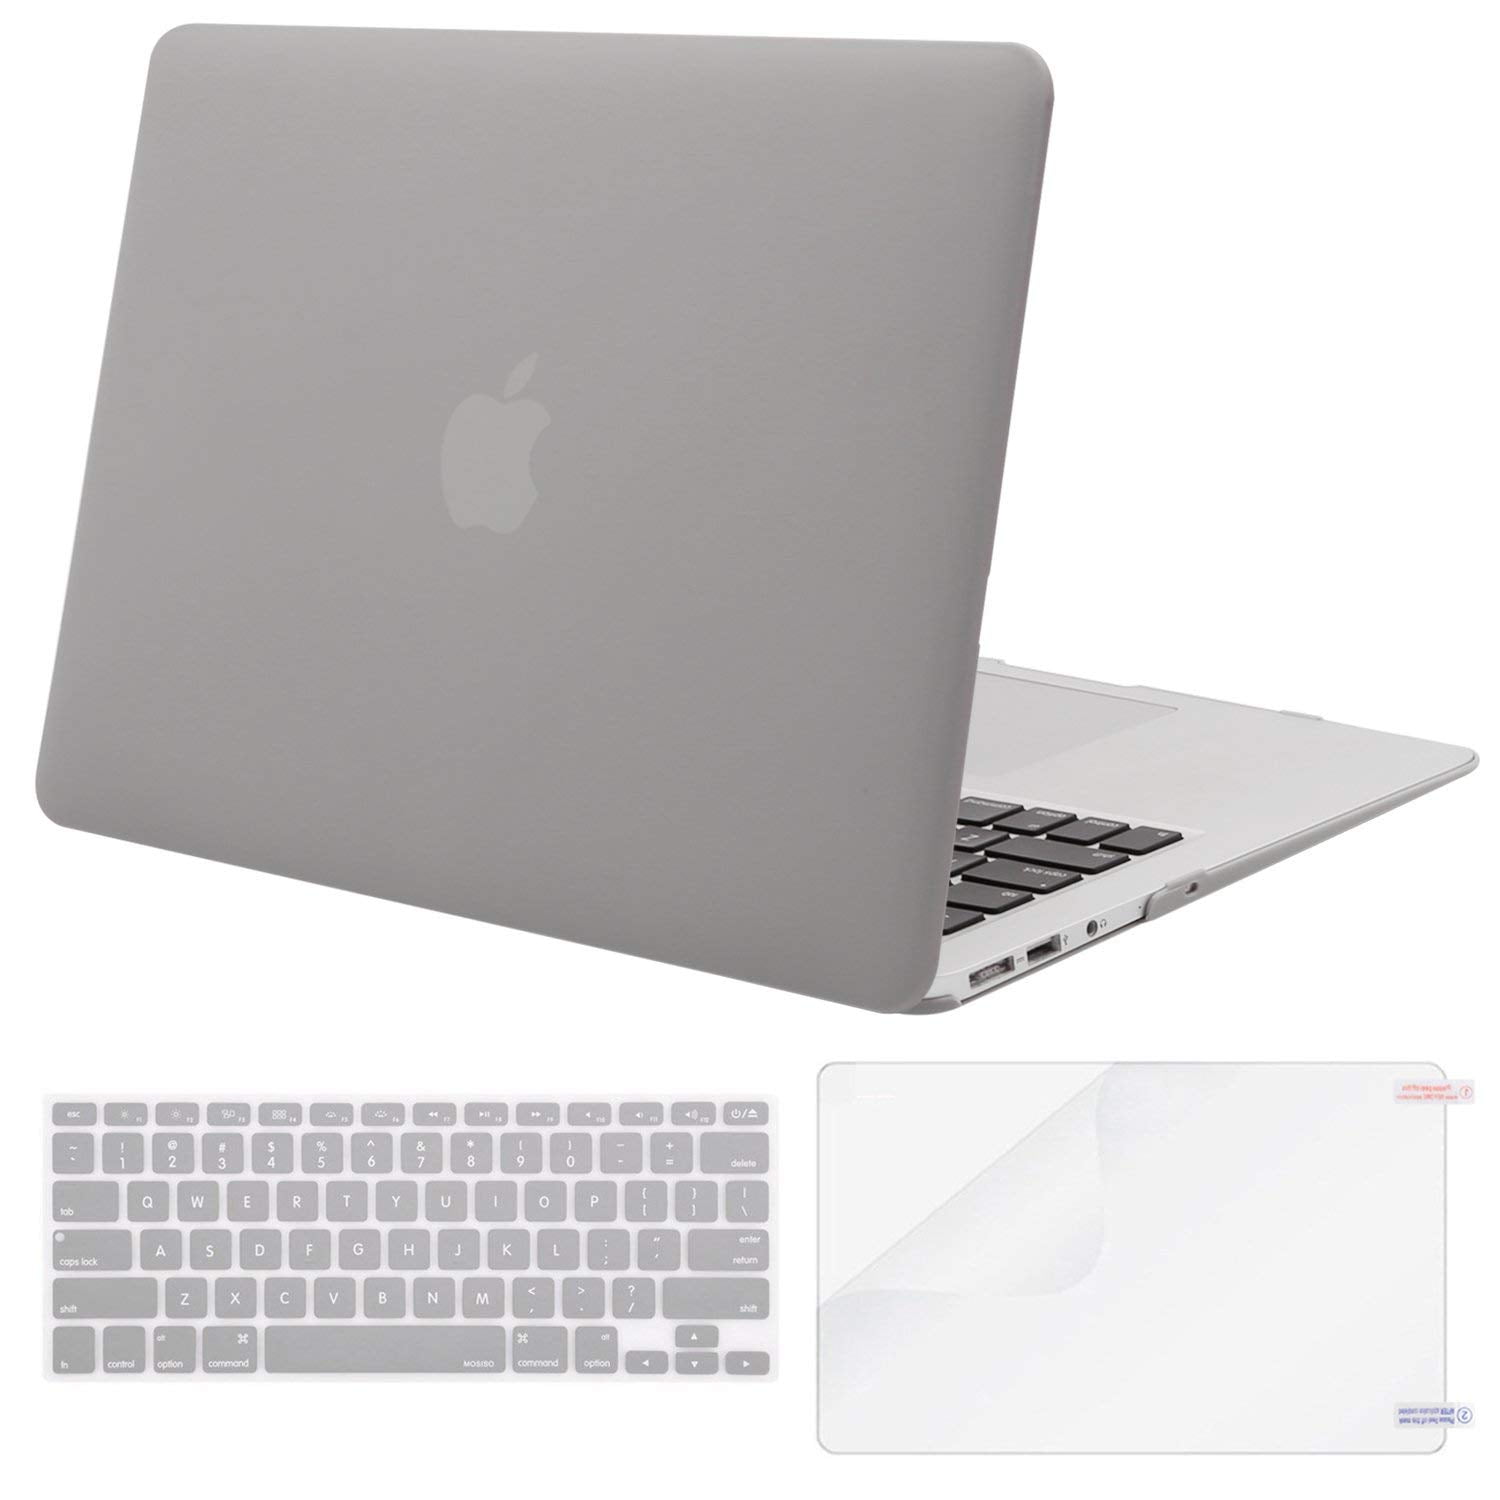 Cut Out Design Hard Case Cover Protective shell for Macbook Air 13 A1369 A1466 